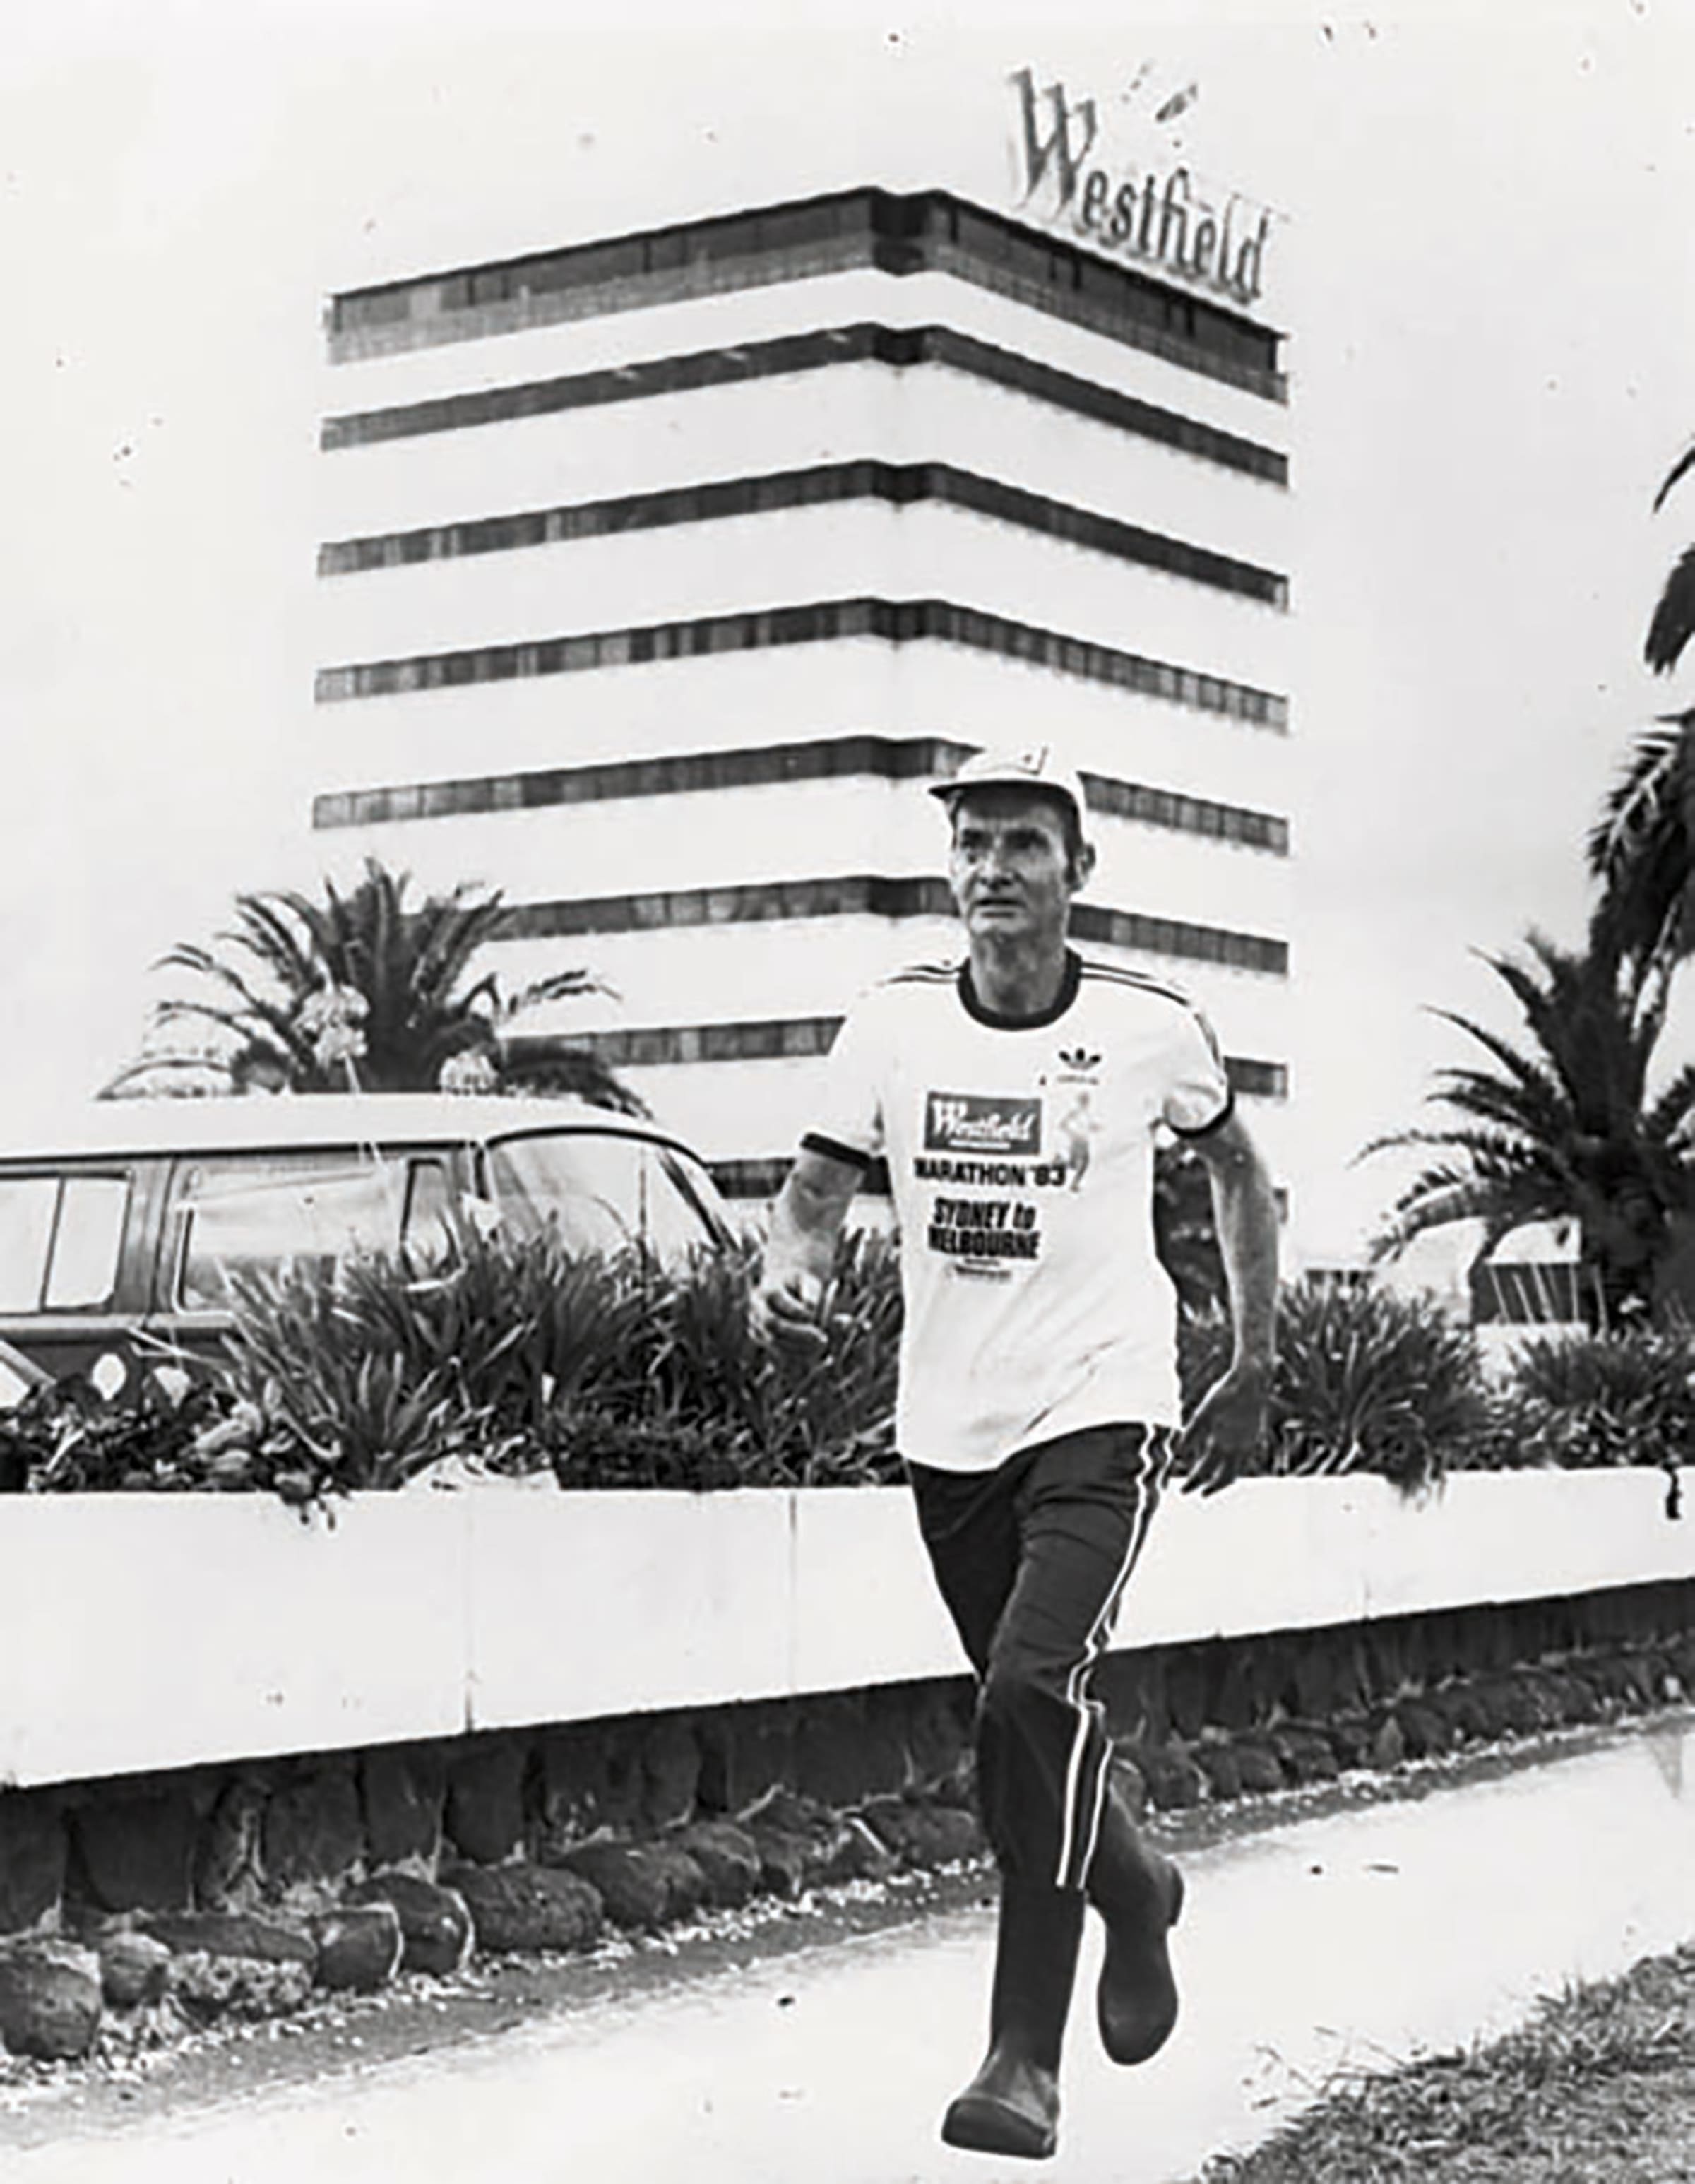 1983-Cliff-Young-wins-the-Westfield-Marathon